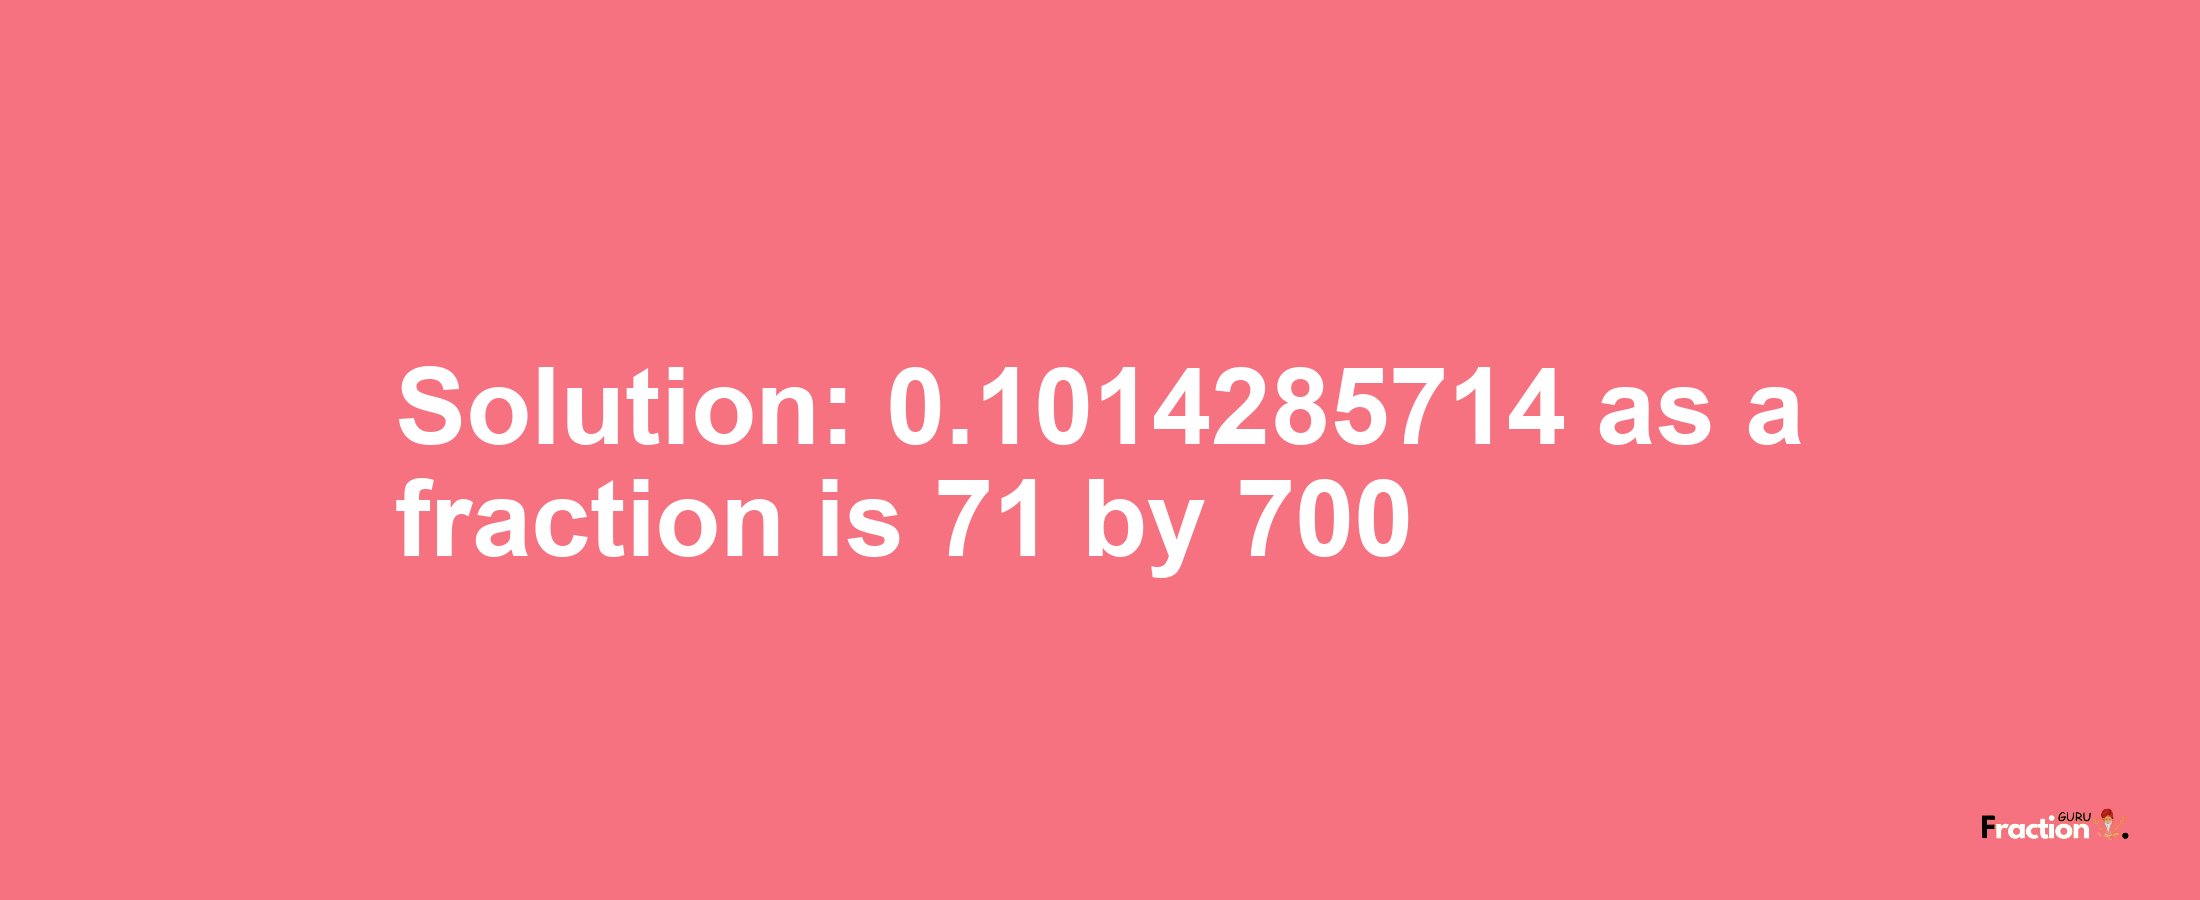 Solution:0.1014285714 as a fraction is 71/700